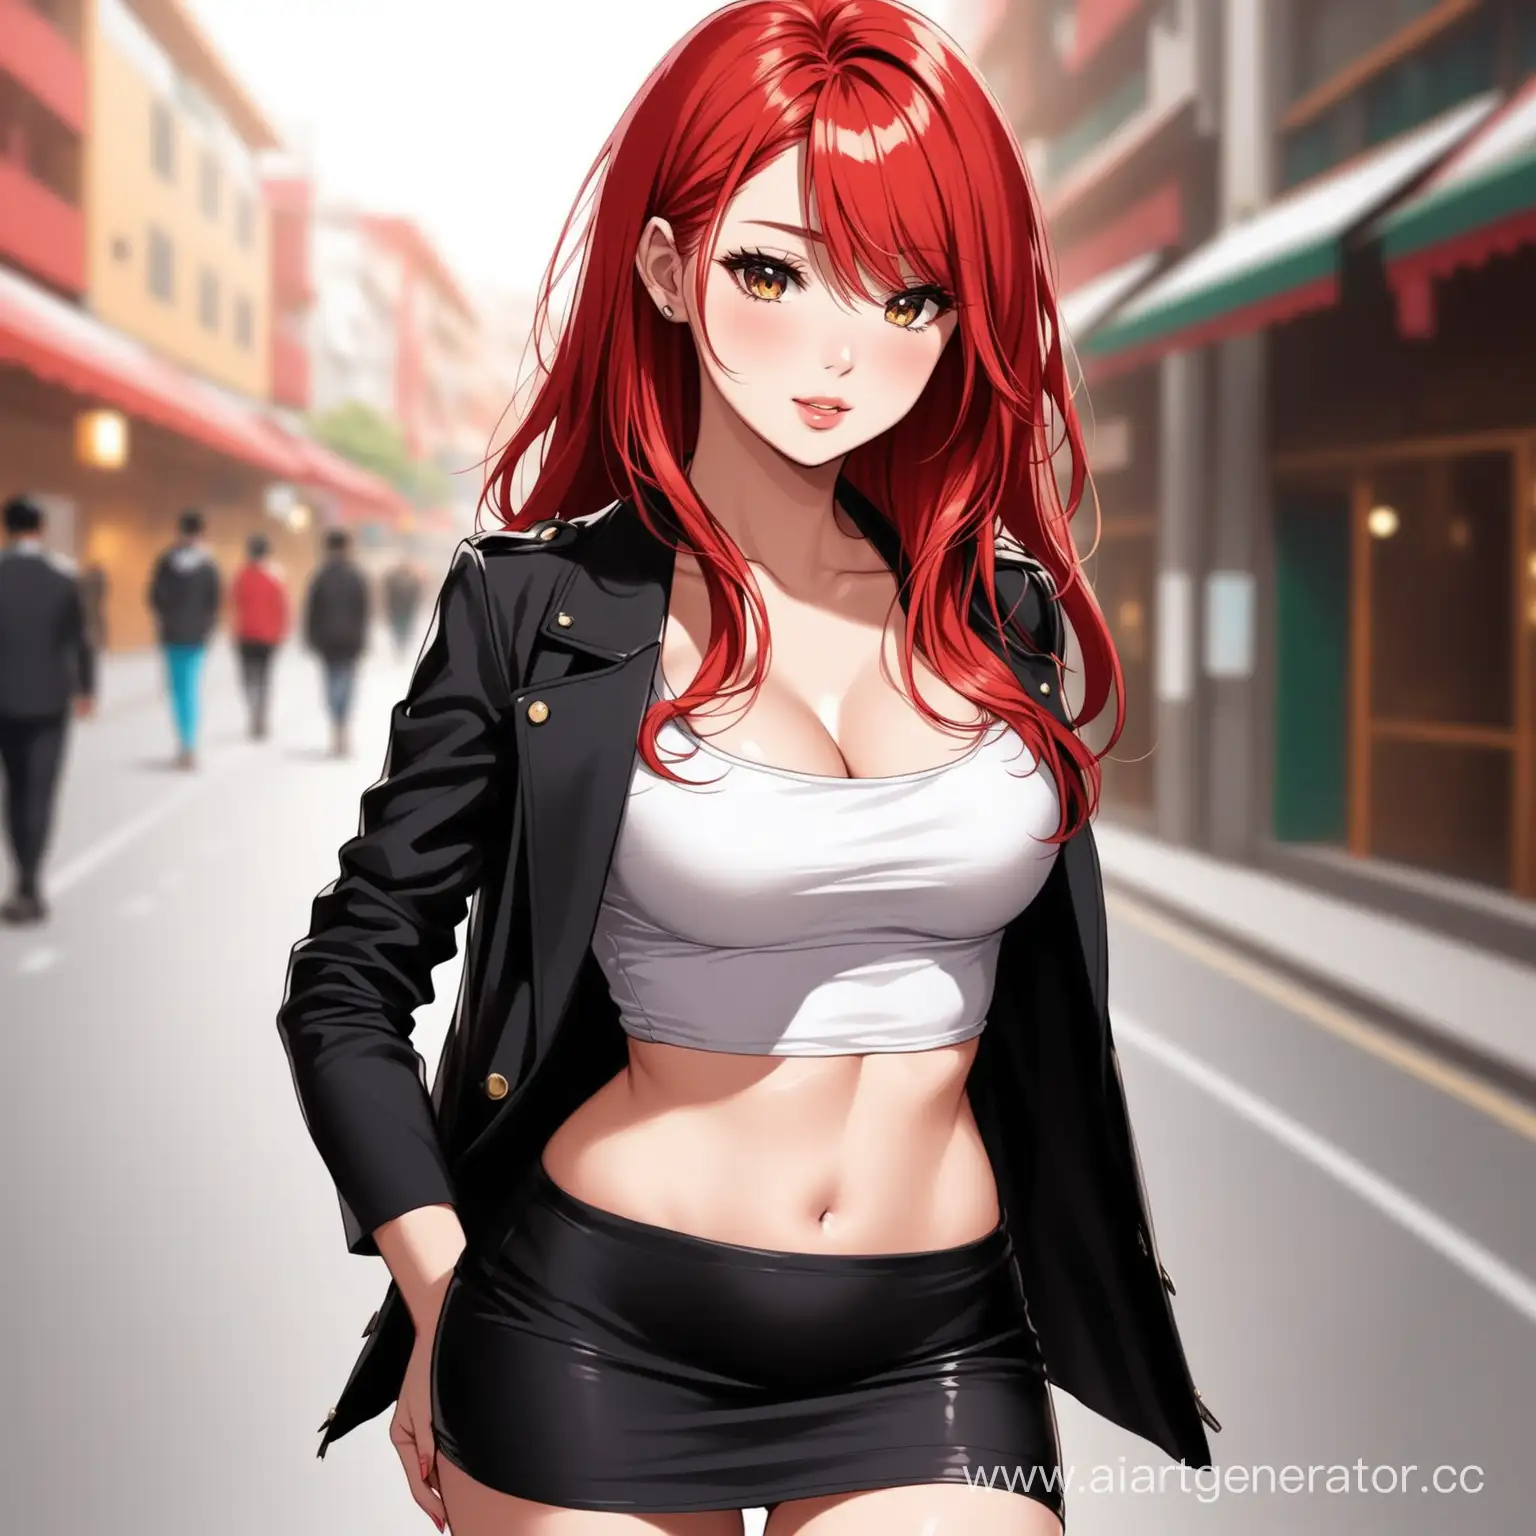 Seductive-RedHaired-Woman-in-a-Stylish-Mini-Skirt